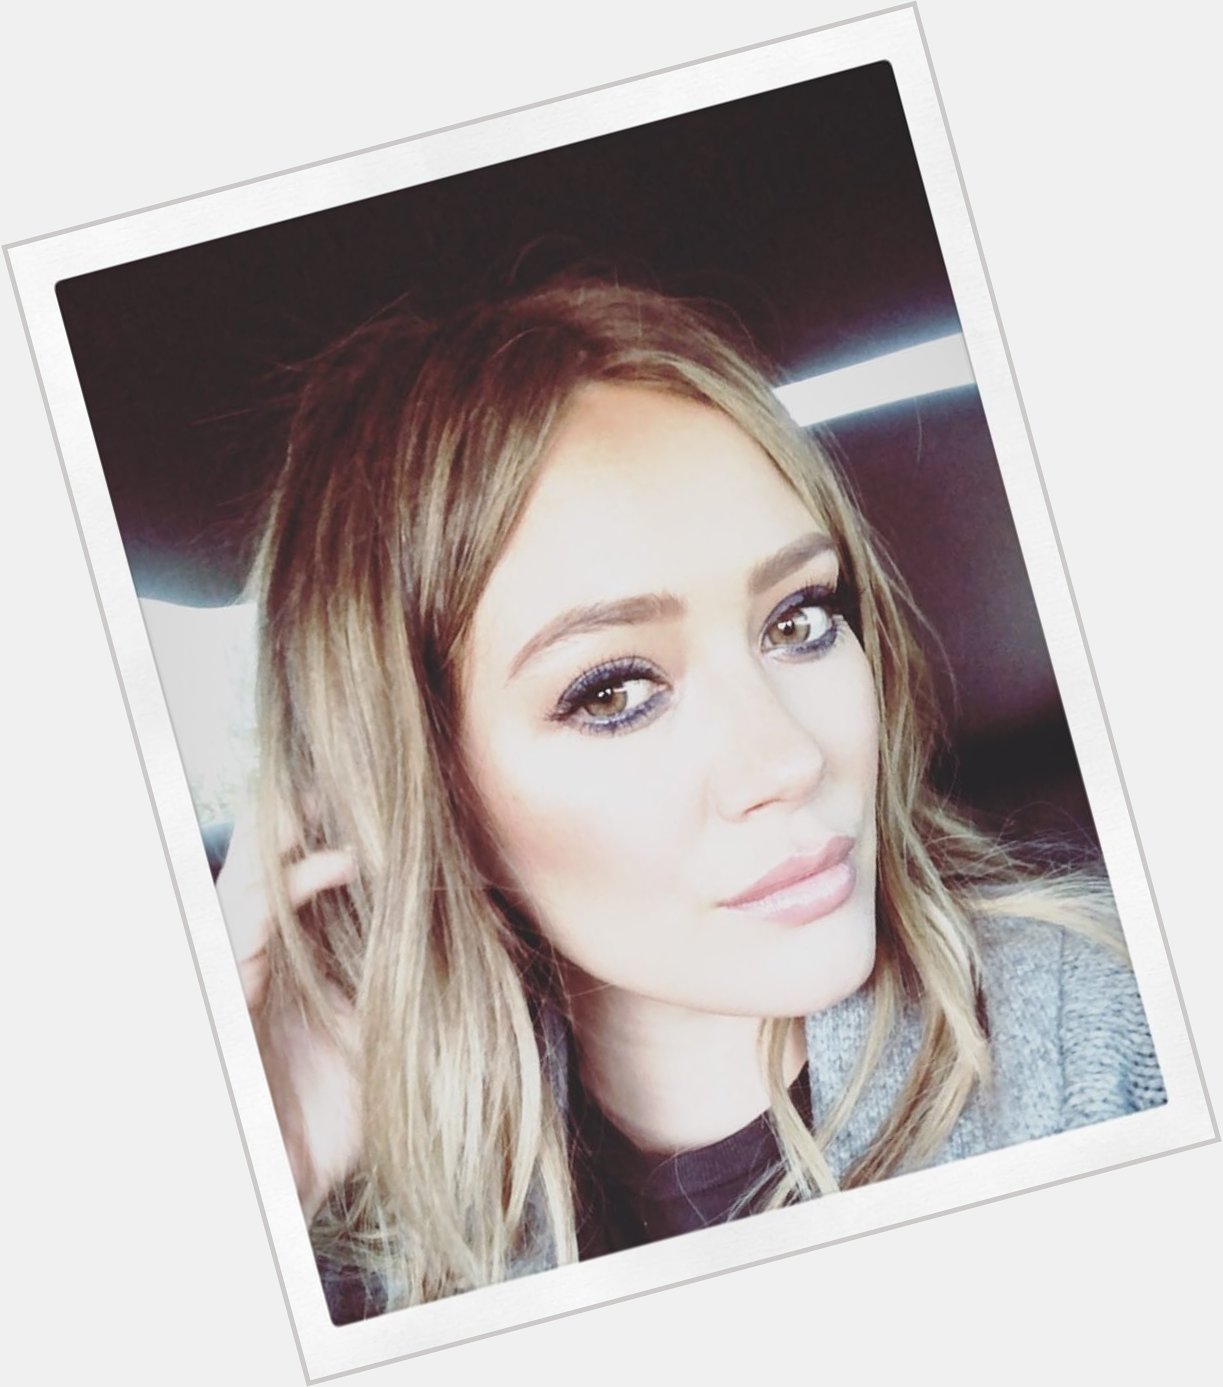 Today was the birthday of one my favorite singers and persons Hilary Duff Happy birthday Hilary    